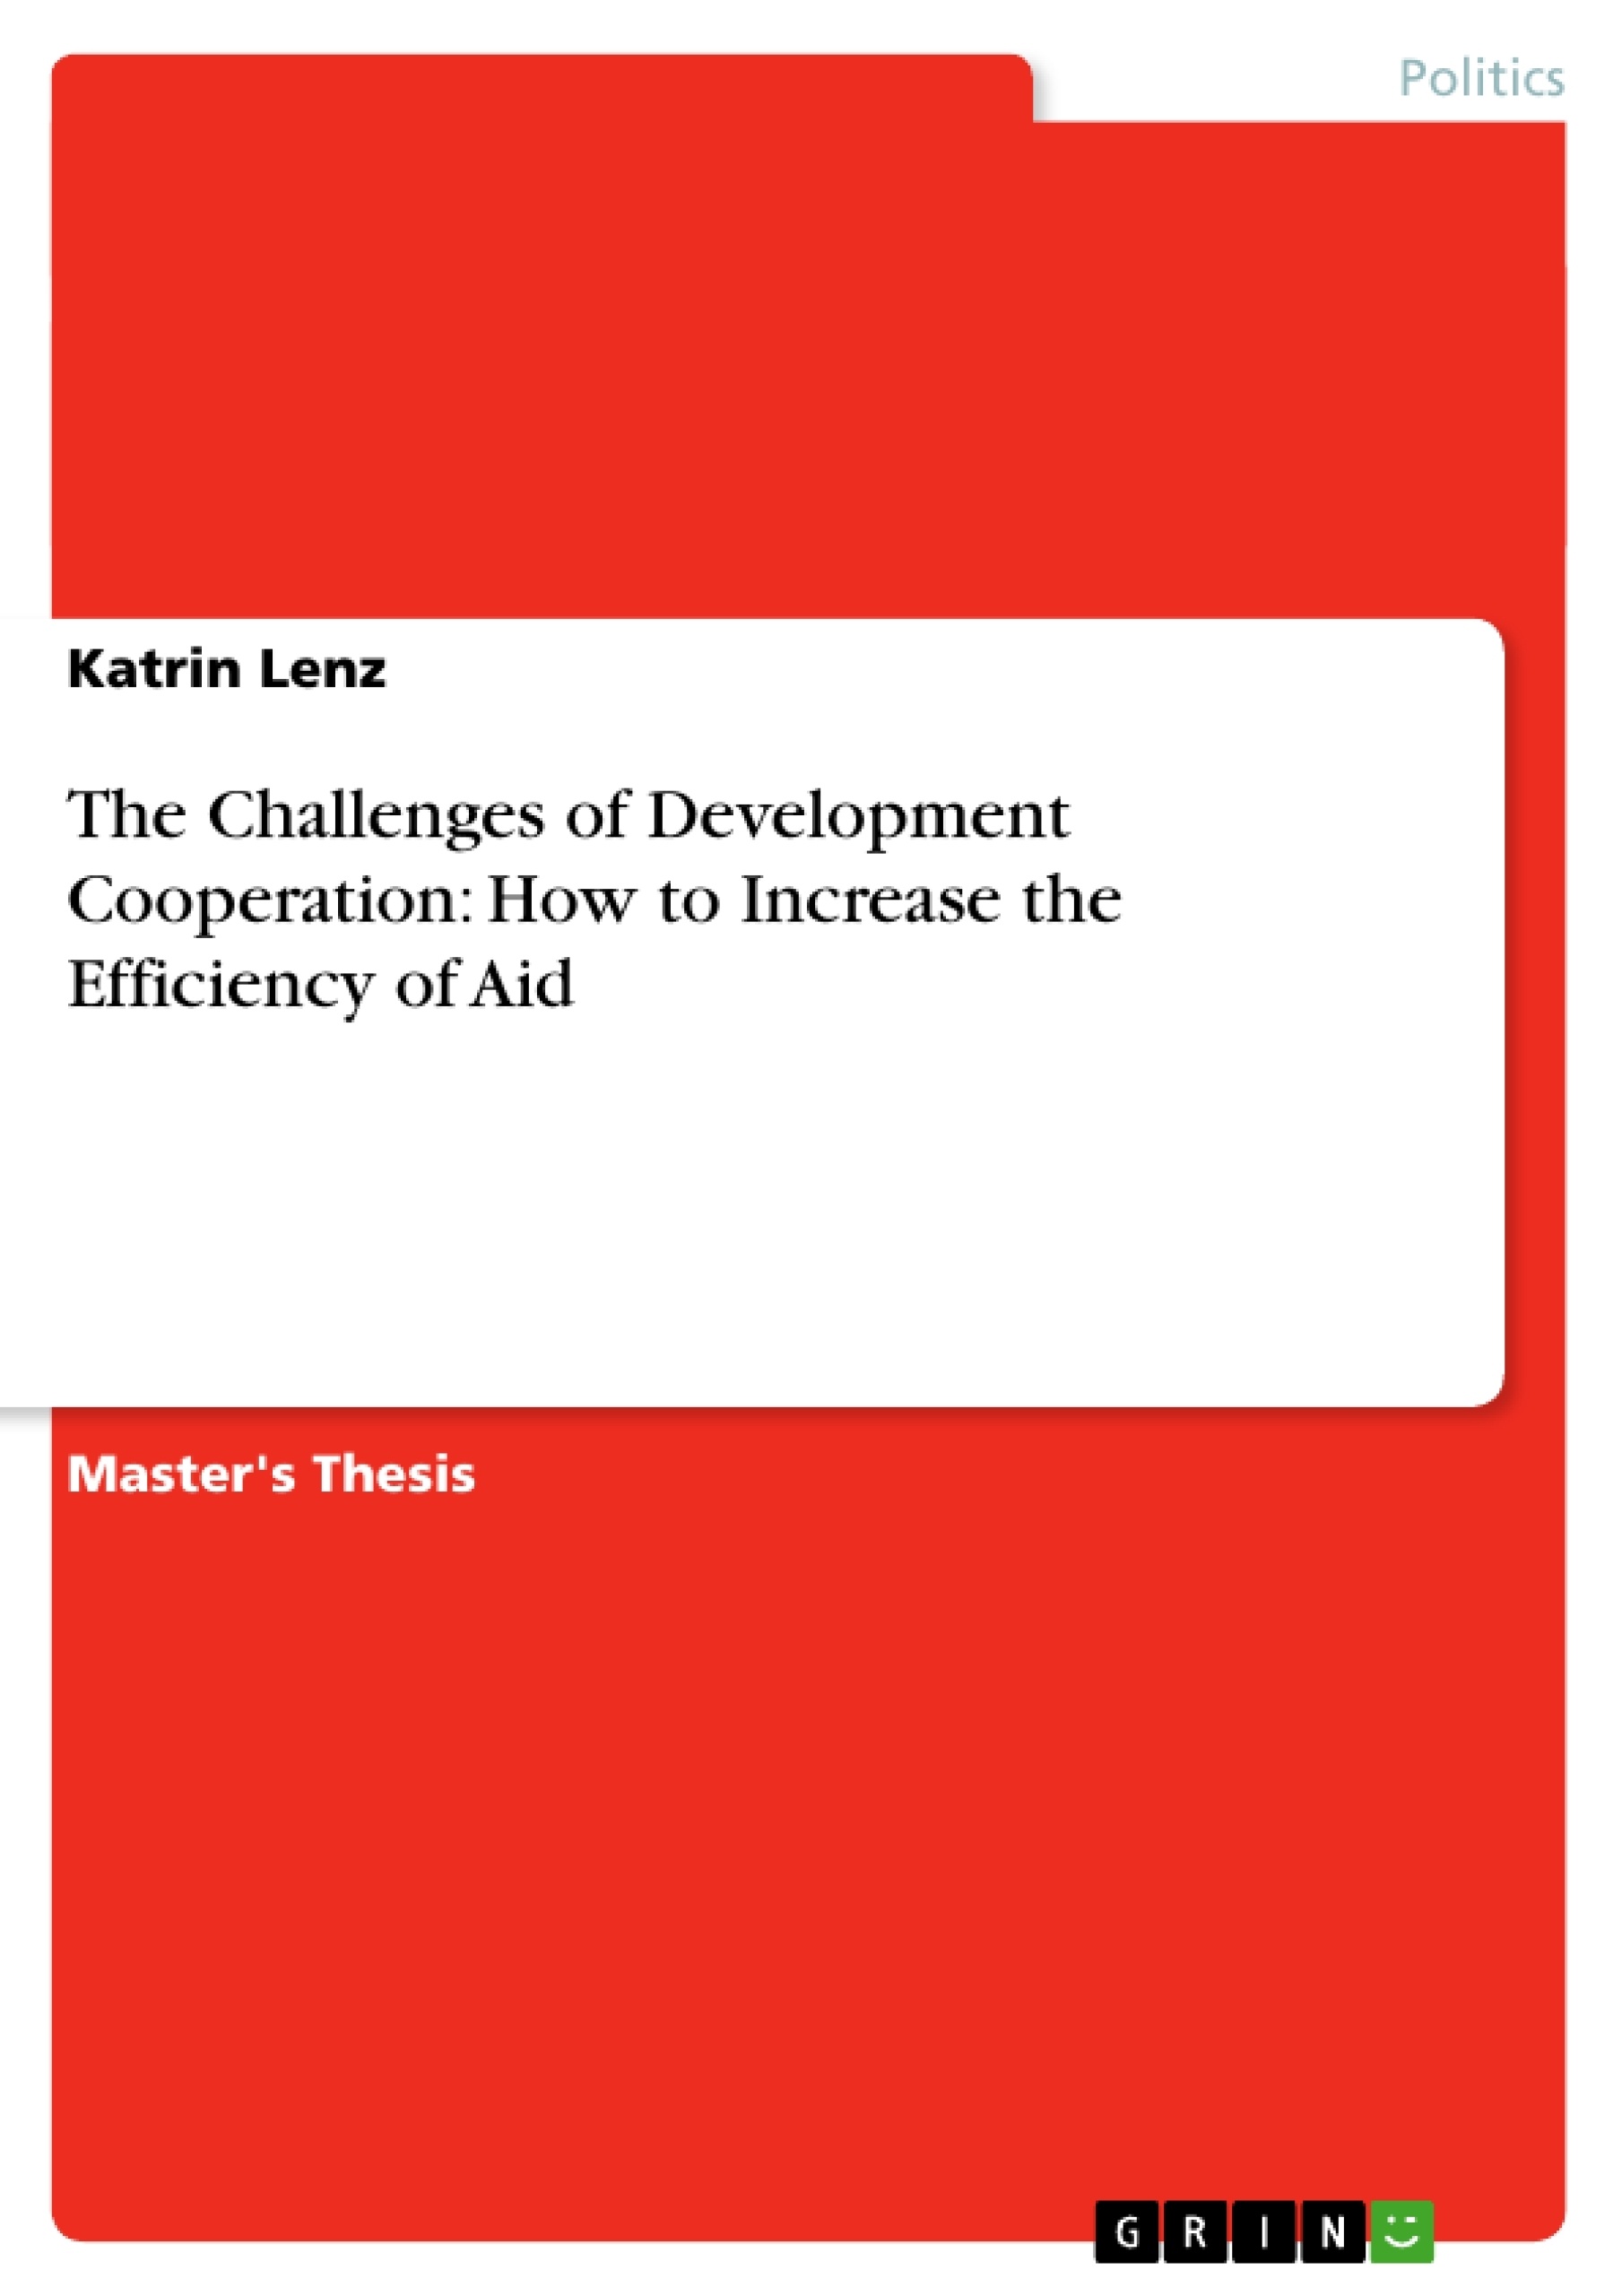 Title: The Challenges of Development Cooperation: How to Increase the Efficiency of Aid